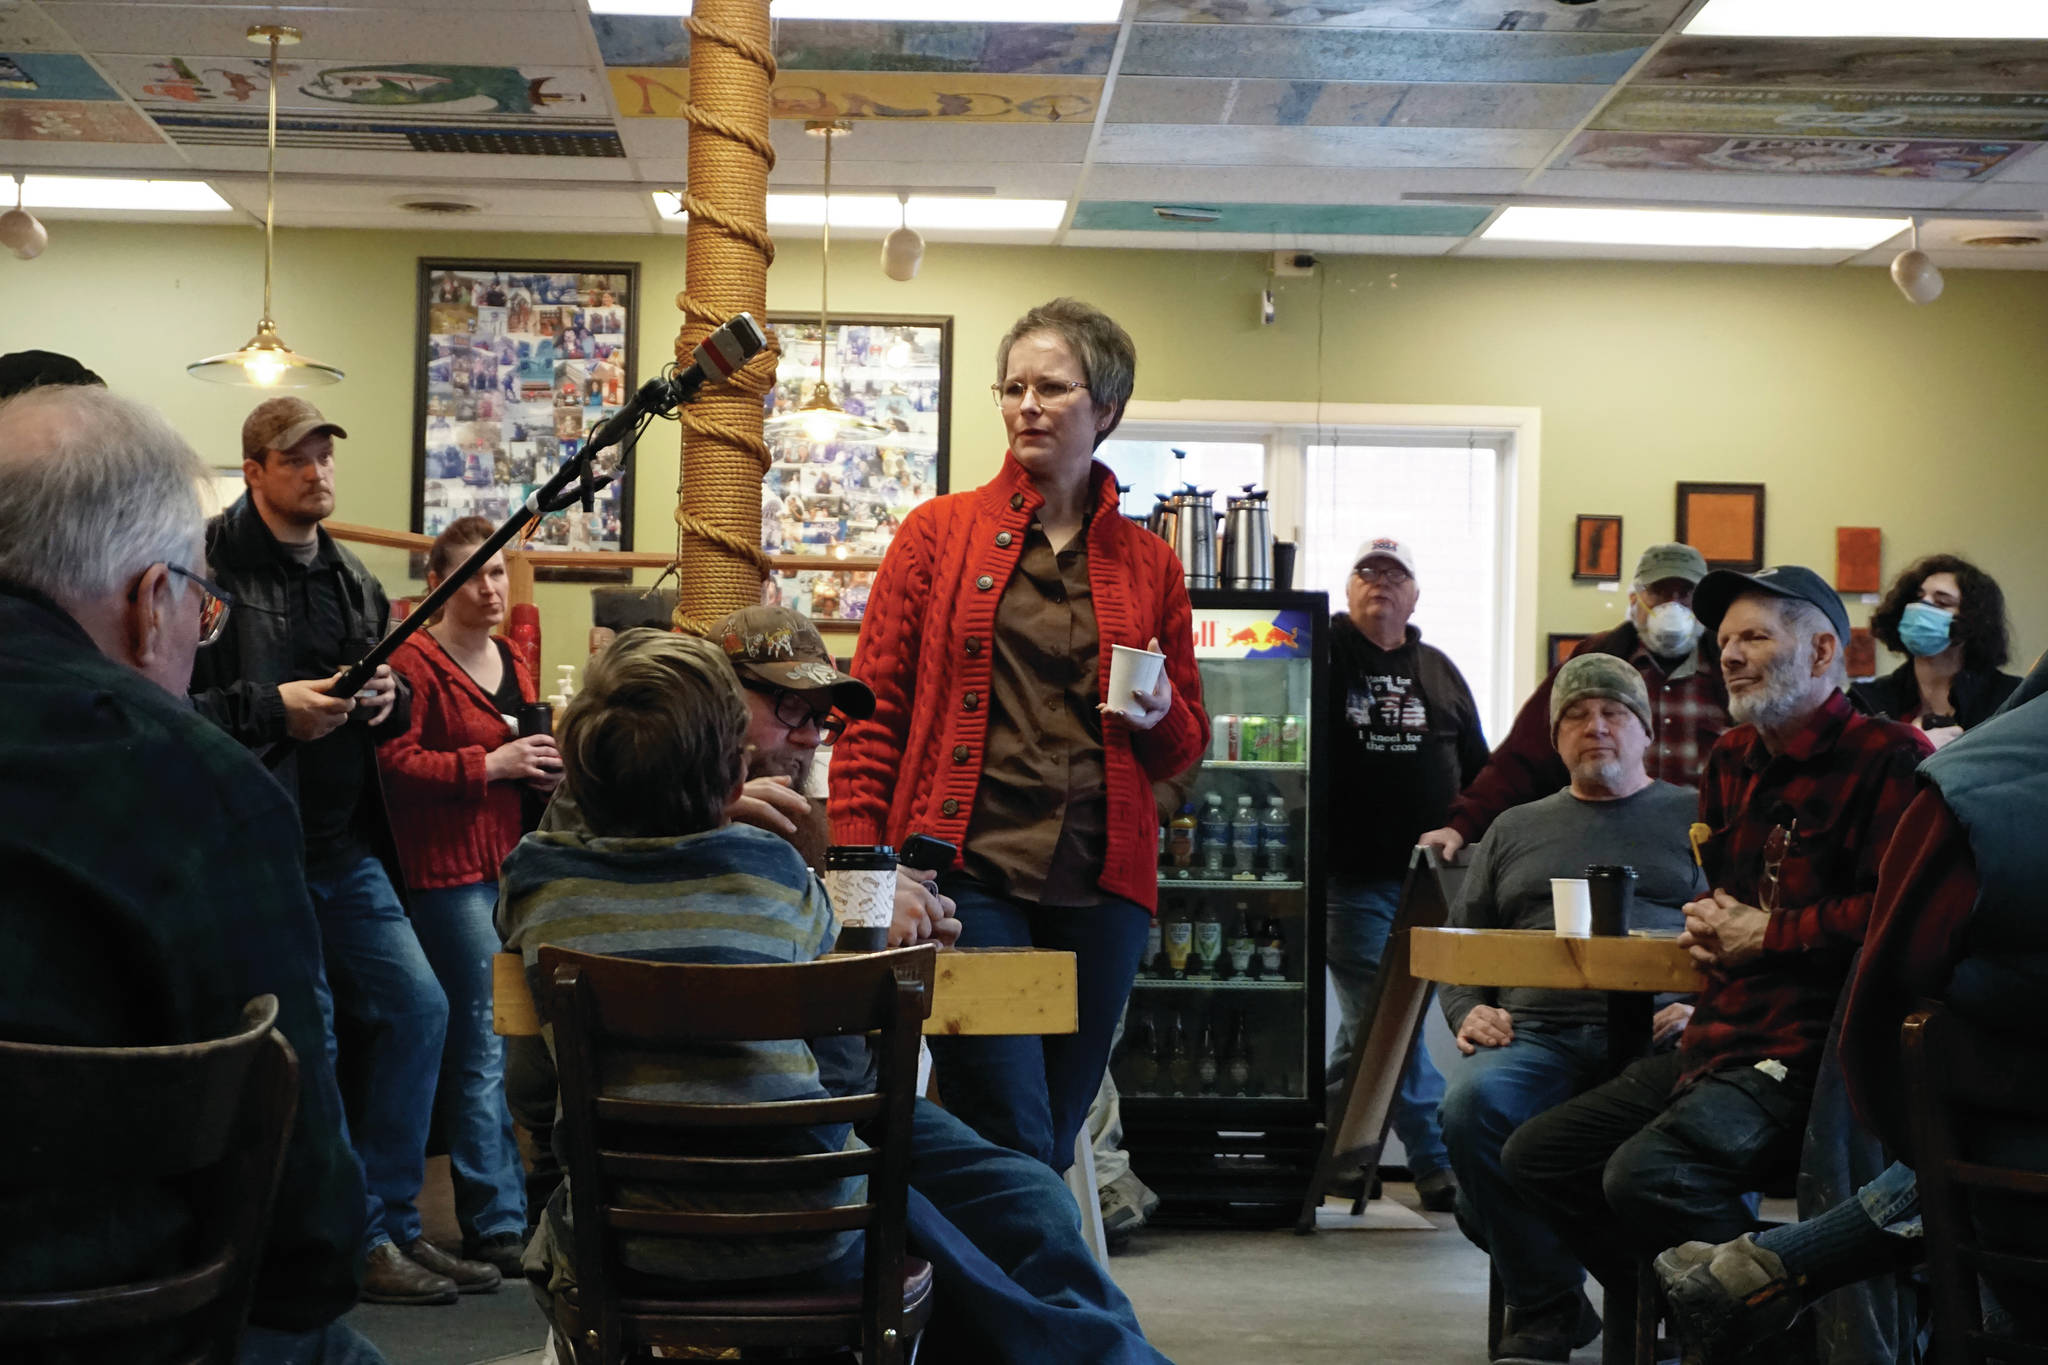 Rep. Sarah Vance, R-Homer, speaks at a town hall meeting on Monday, March 29, 2021, at Captain's Coffee in Homer, Alaska. (Photo by Michael Armstrong/Homer News)